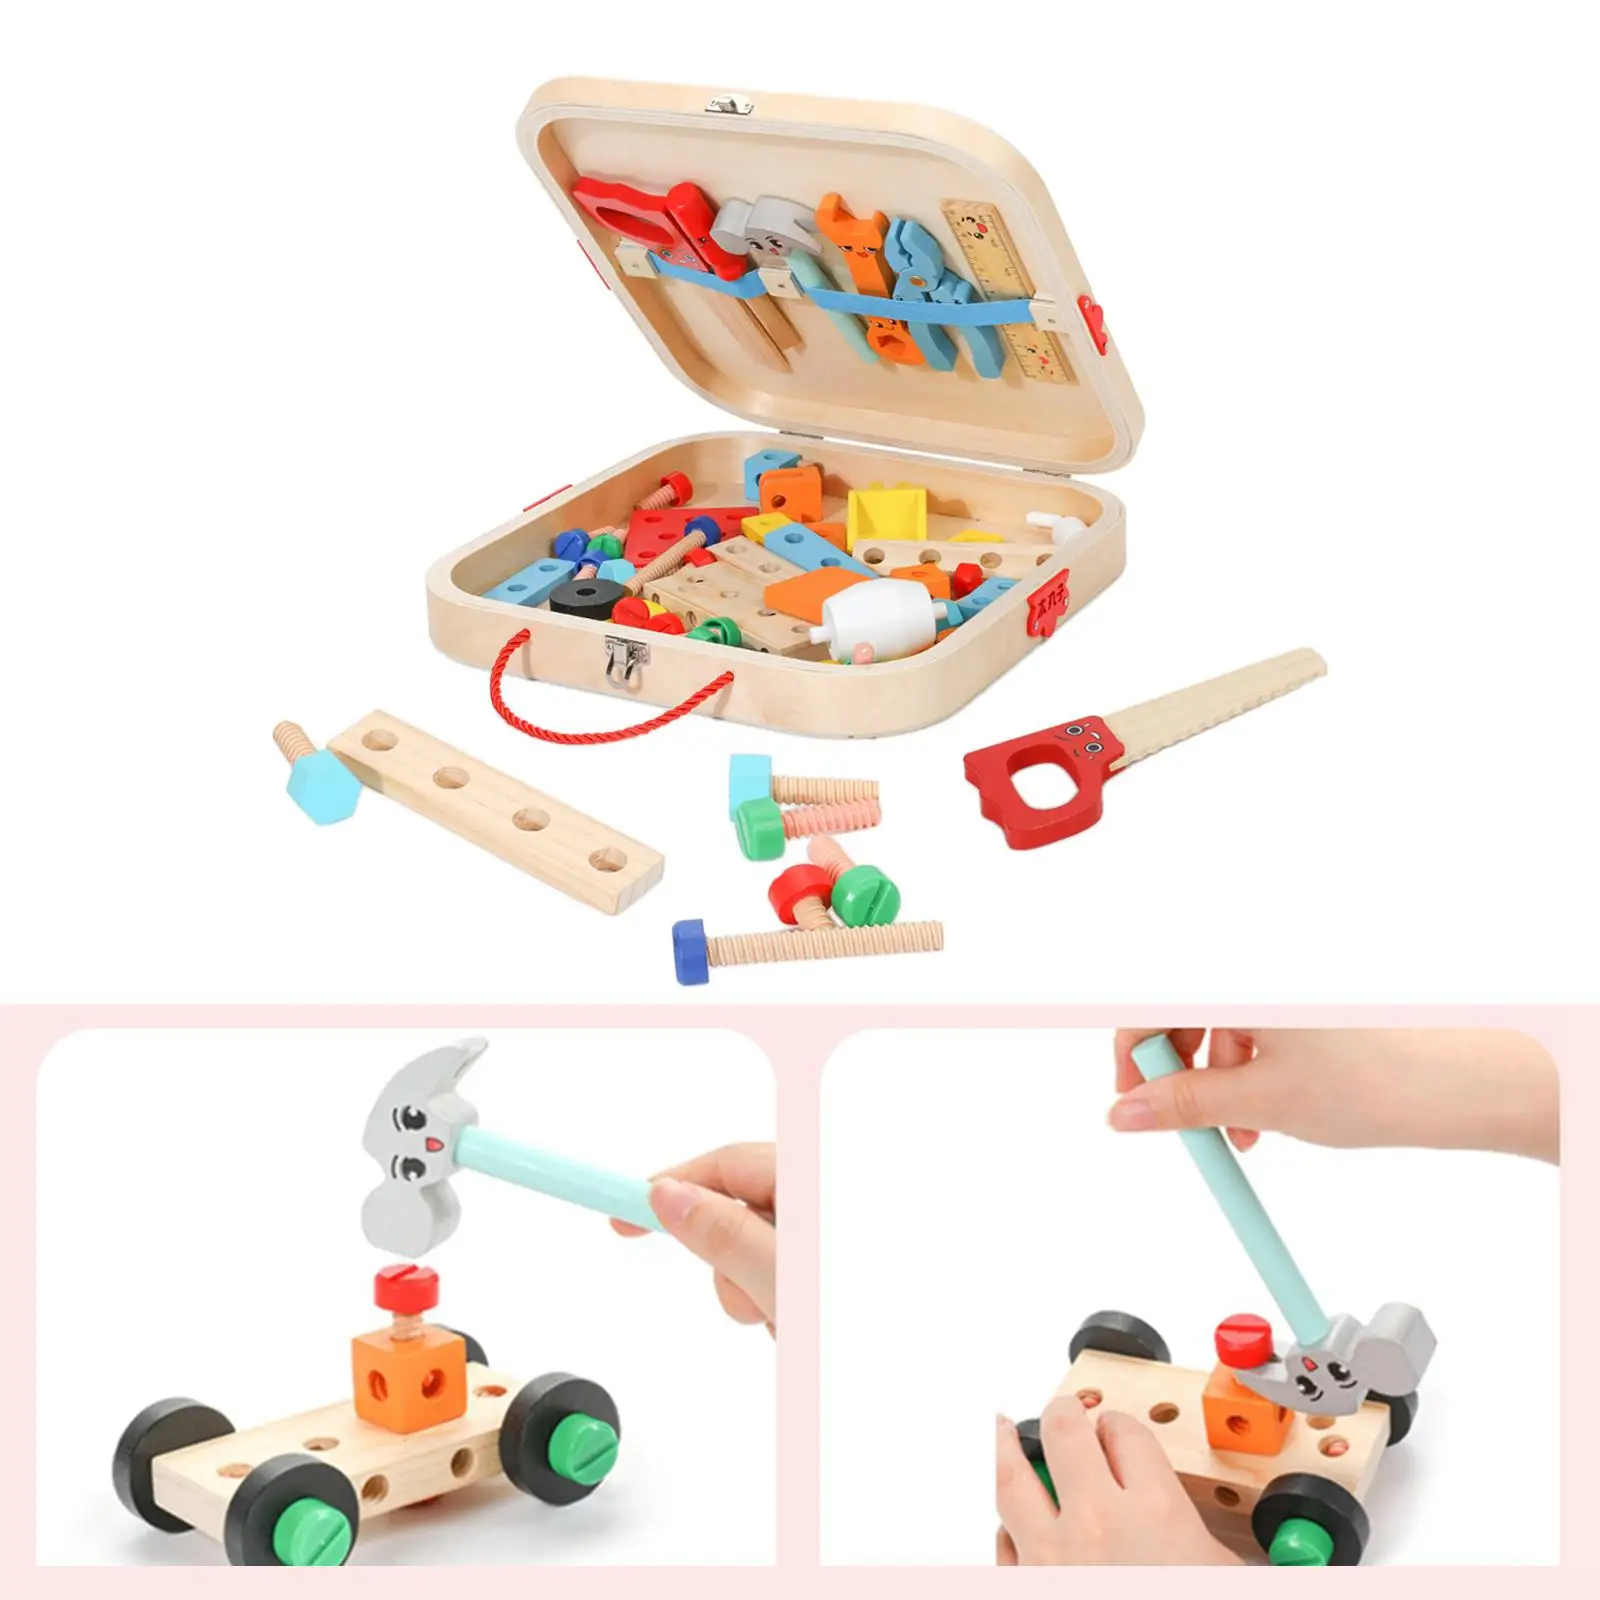 Wooden Kid Tool Set Construction Toy Set Montessori Educational Toy Wooden Toy Tool Box for Birthday Gift Home Bedroom DIY Baby